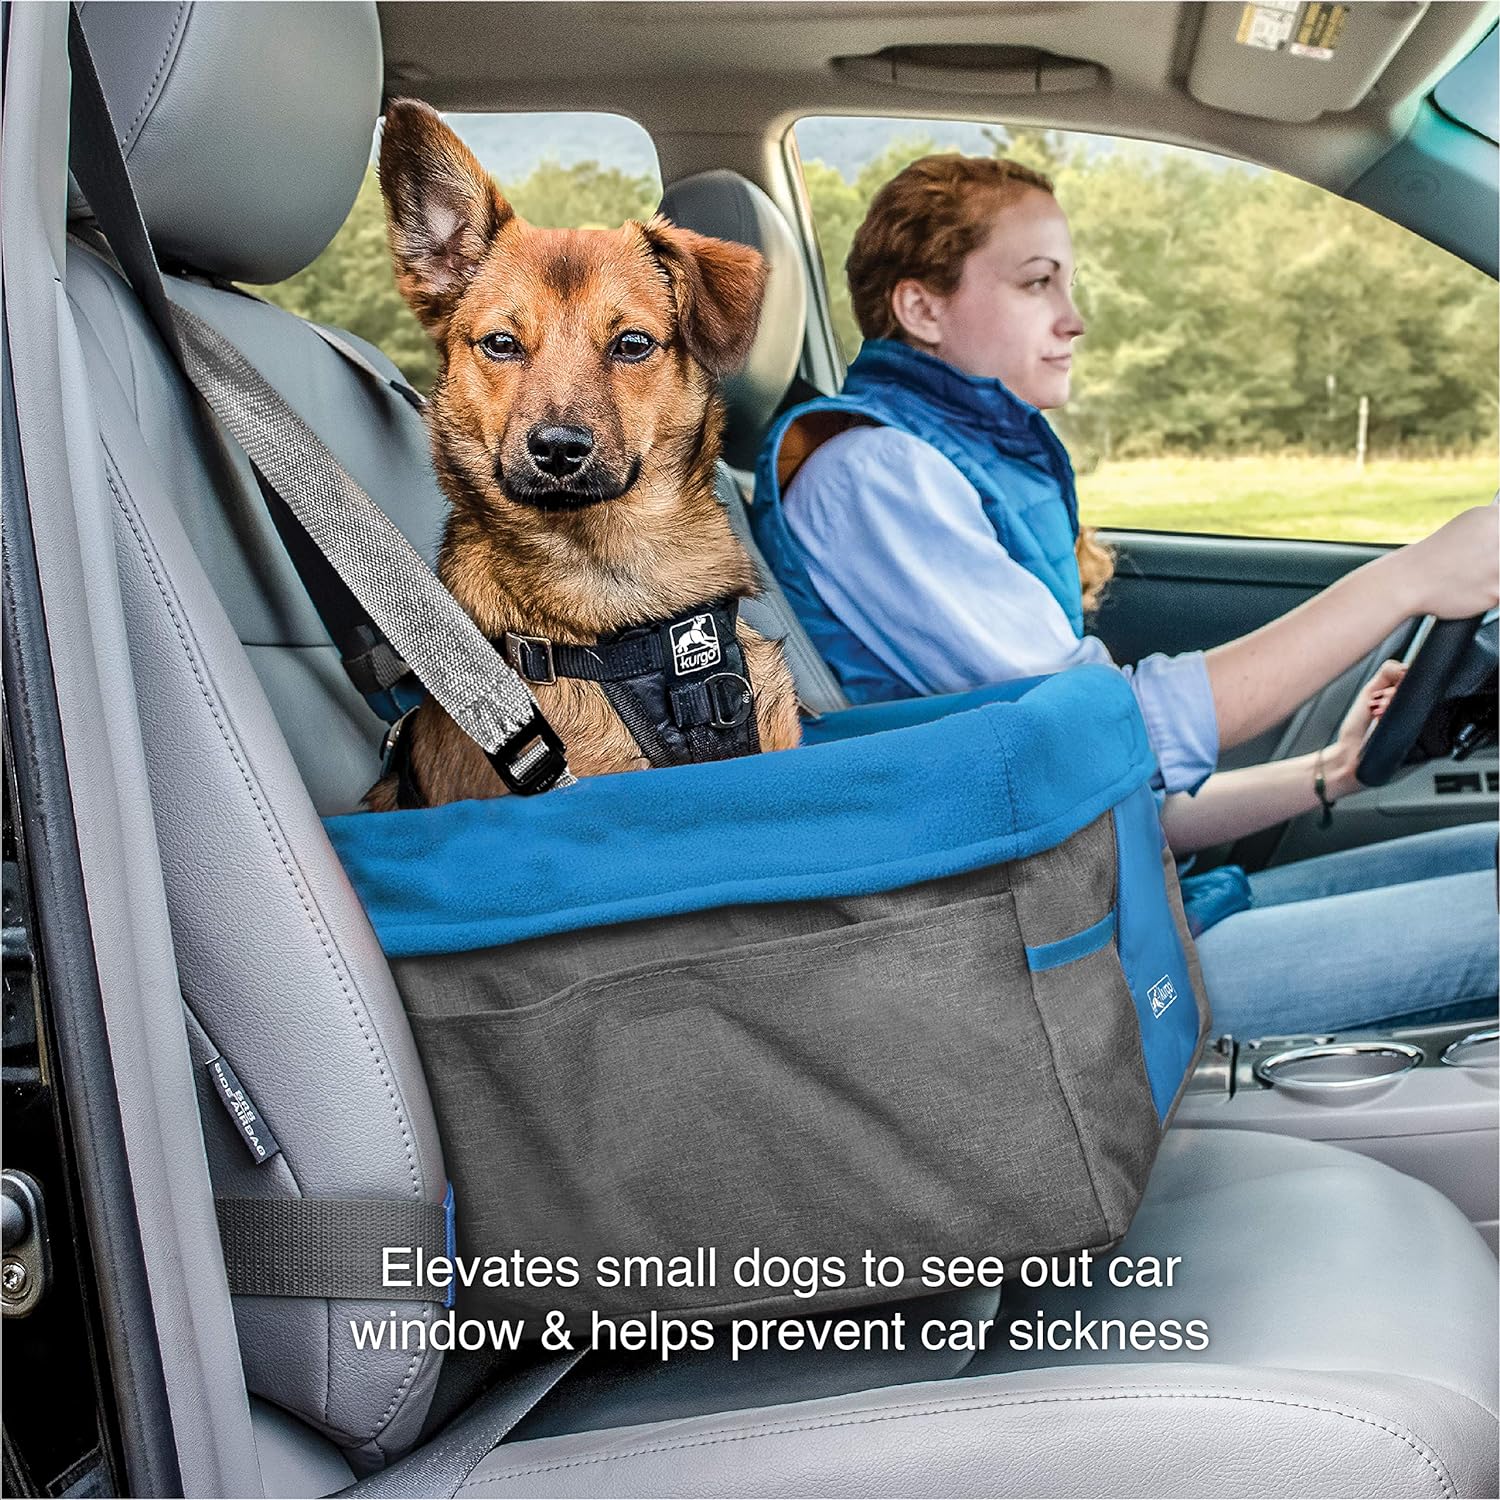 Kurgo Dog Booster Seats for Cars - Pet Car Seats for Small Dogs and Puppies Weighing Under 30 lbs - Headrest Mounted - Dog Car Seat Belt Tether Included - Heather Style, Charcoal/Blue